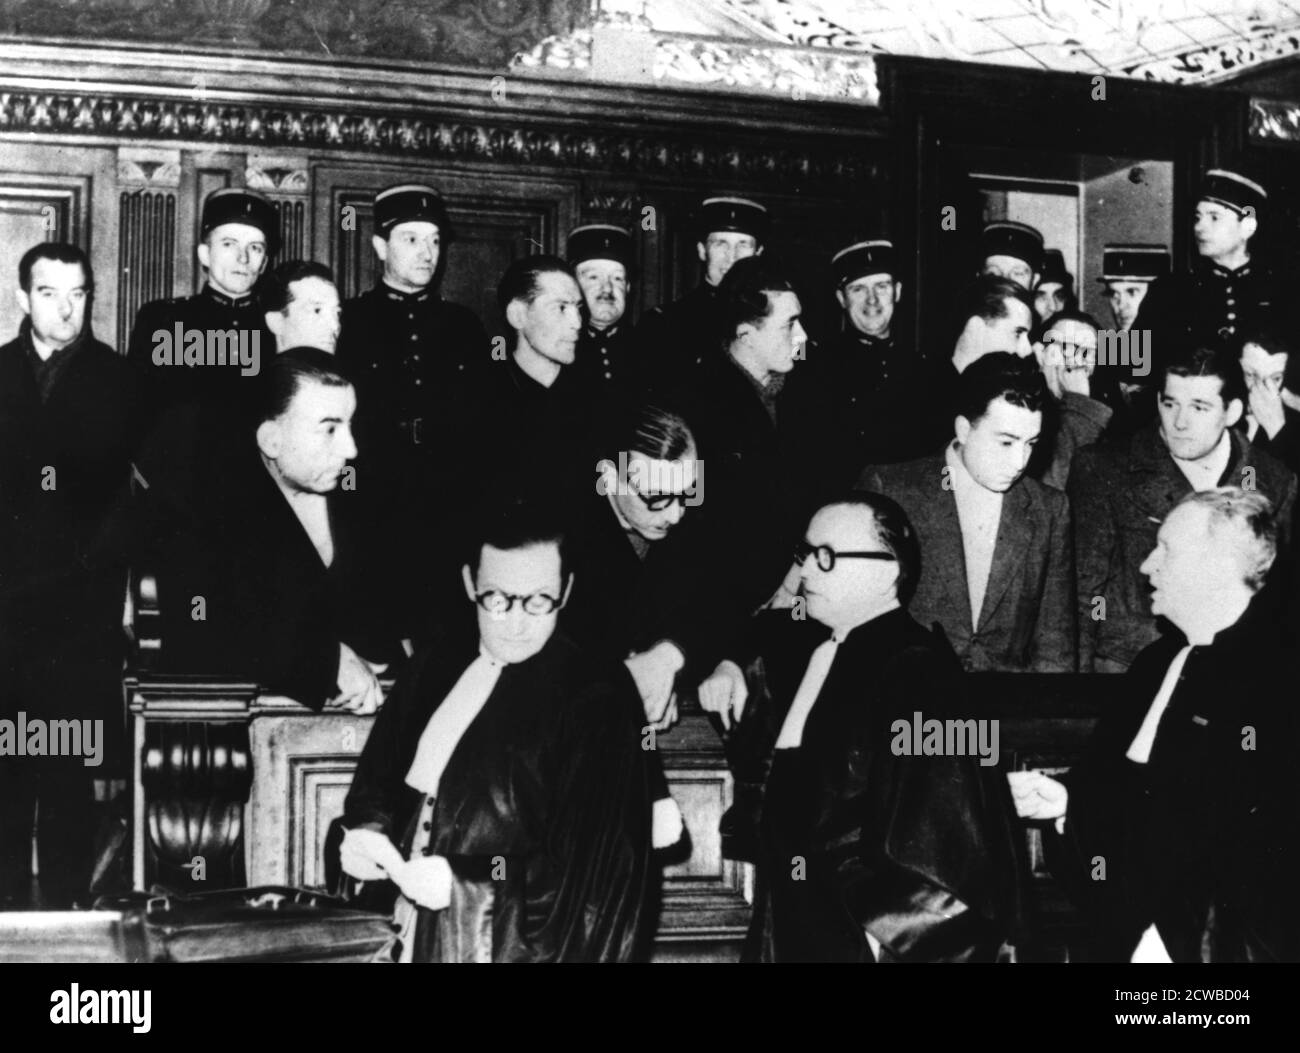 Trial of French members of the Gestapo, Paris, 1-12 December 1944. The defendants, from left to right, are Henri Lafont, Pierre Bonny and Paul Clavie. They are defended by Messrs Floriot, Delaunay and Casanova. Bonny, a police inspector before the war, was apprehended on 18 September 1944 disguised as a tramp. The three were found guilty of collaboration and executed on 27 December. The photographer is unknown. Stock Photo